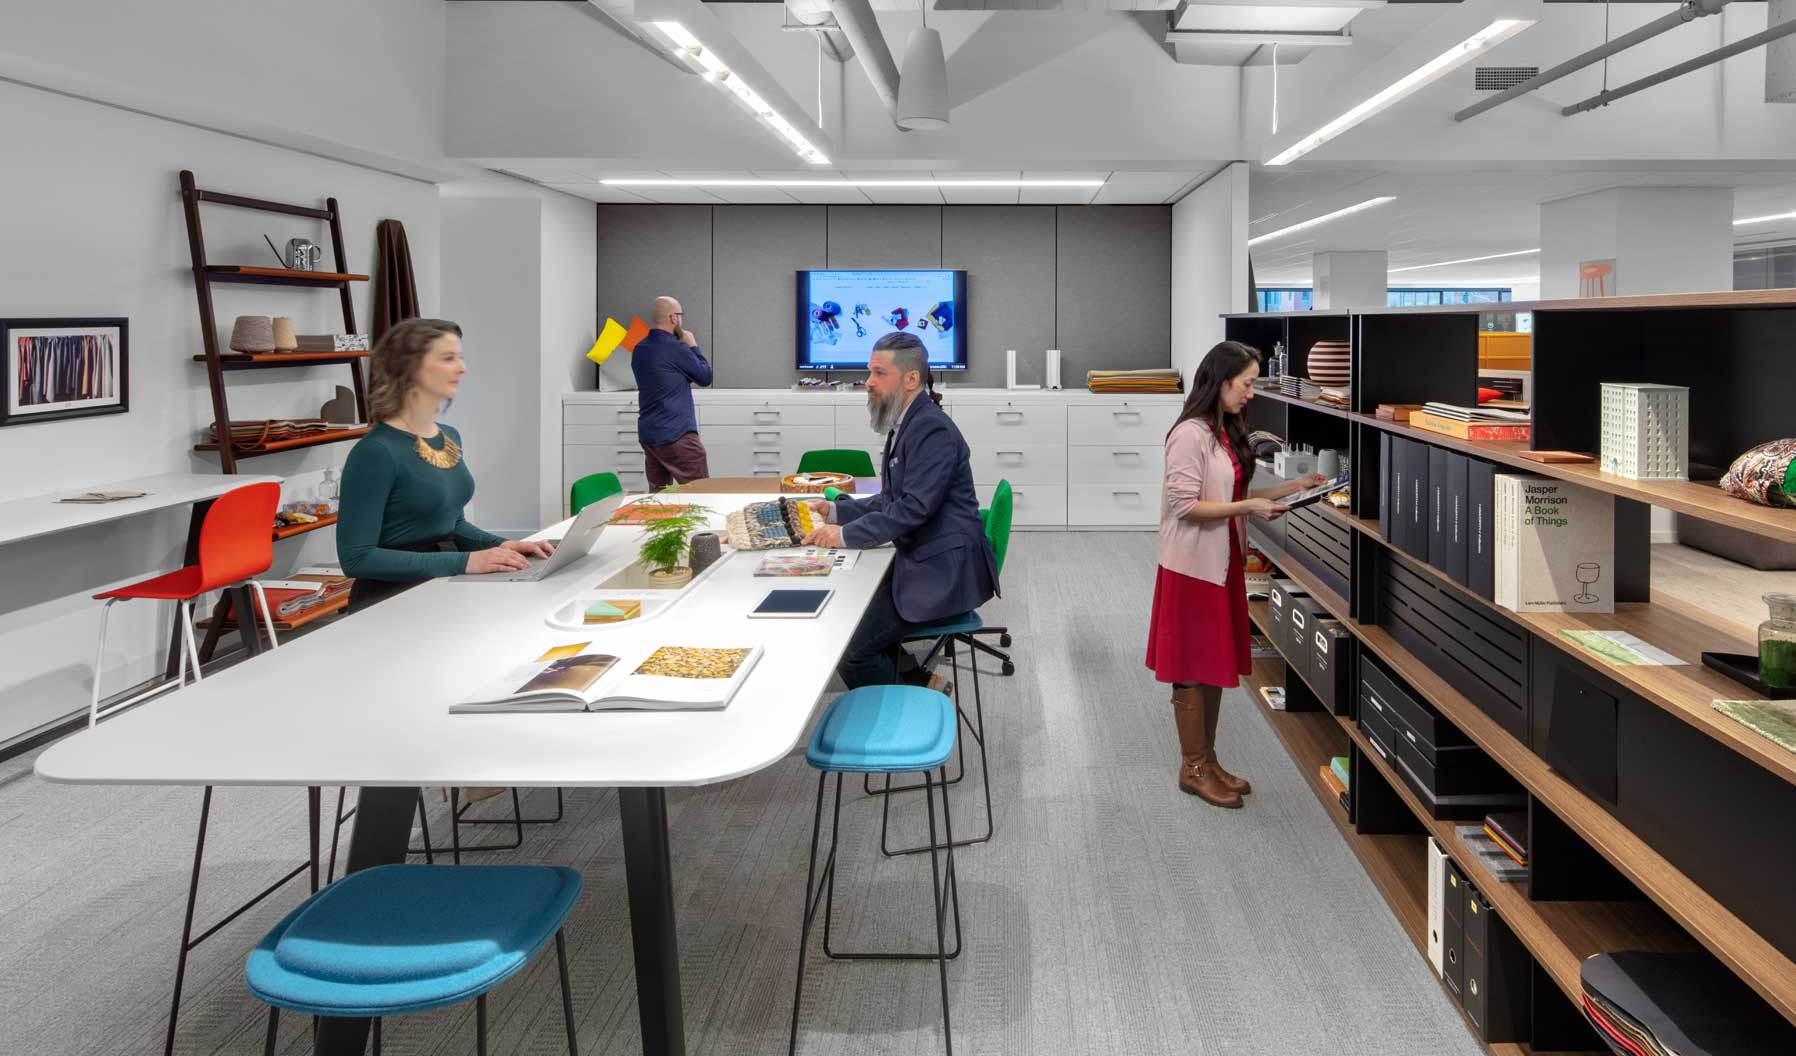 The Design Resource Center is a an active working space in which you can dive into Haworth’s wide range of materials and fabrics. A large standing height collaborative table fosters creative thought and collaboration.